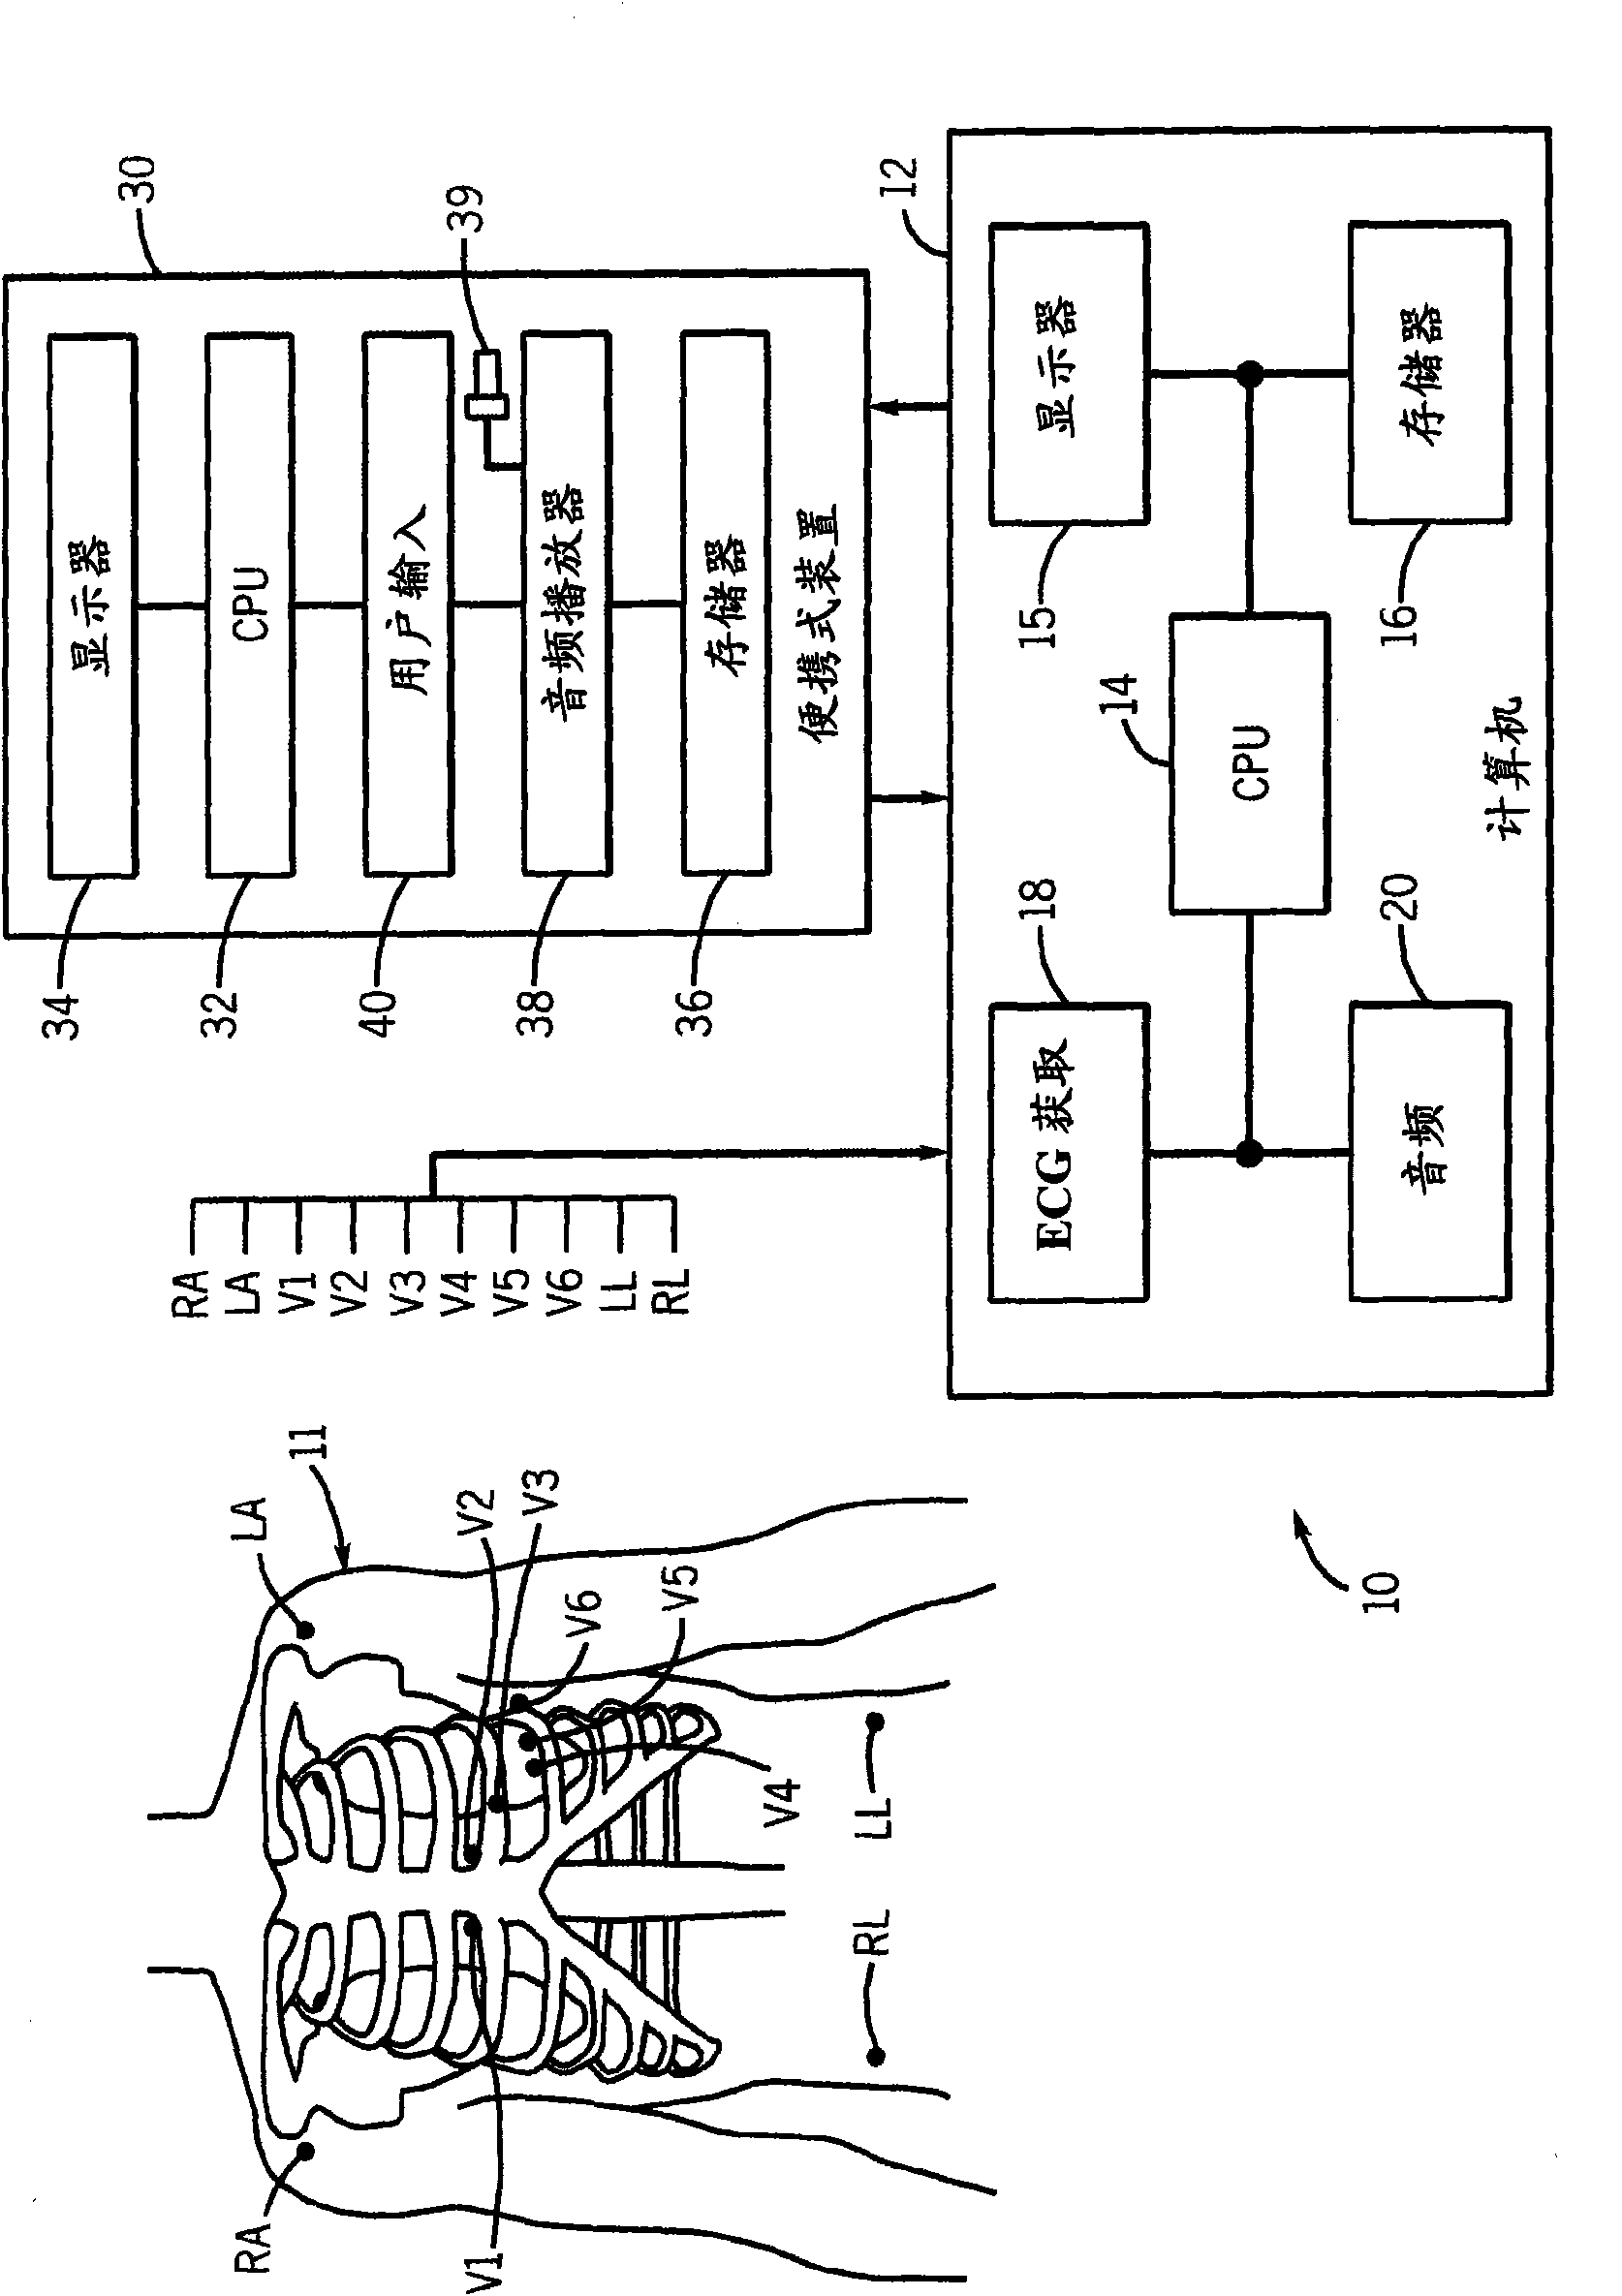 Method and system for patient evaluation